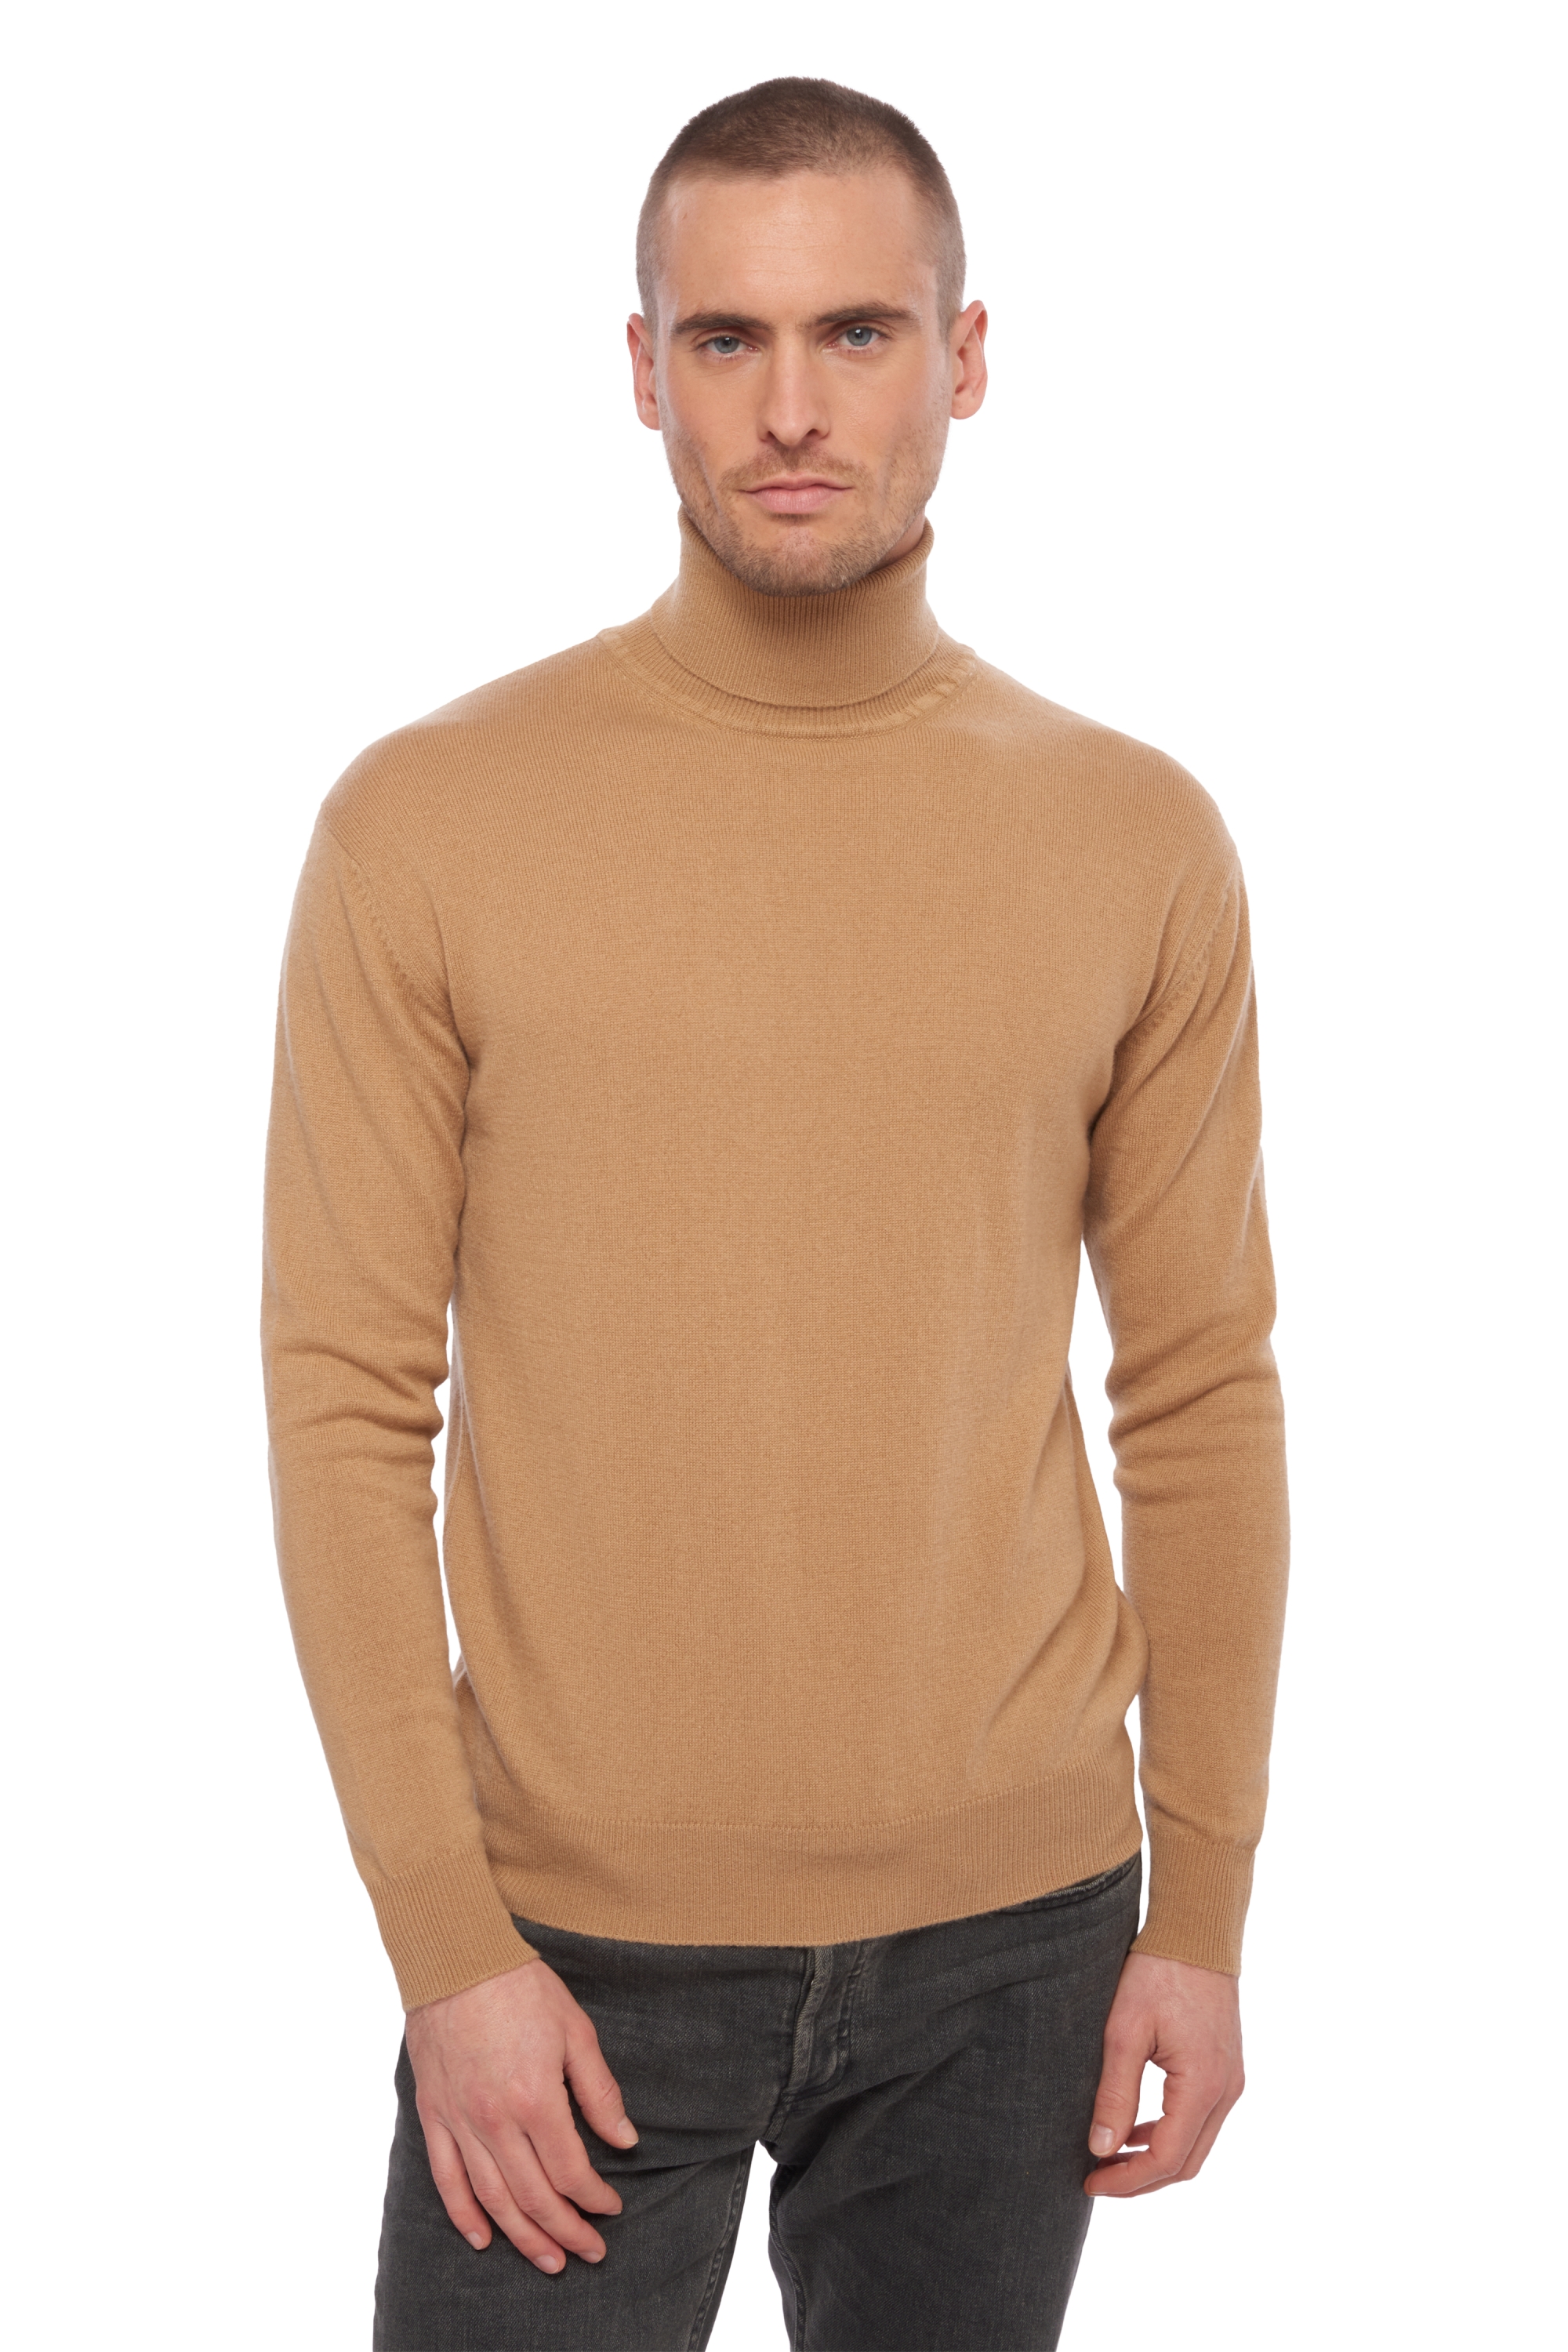 Cachemire pull homme col roule edgar camel l